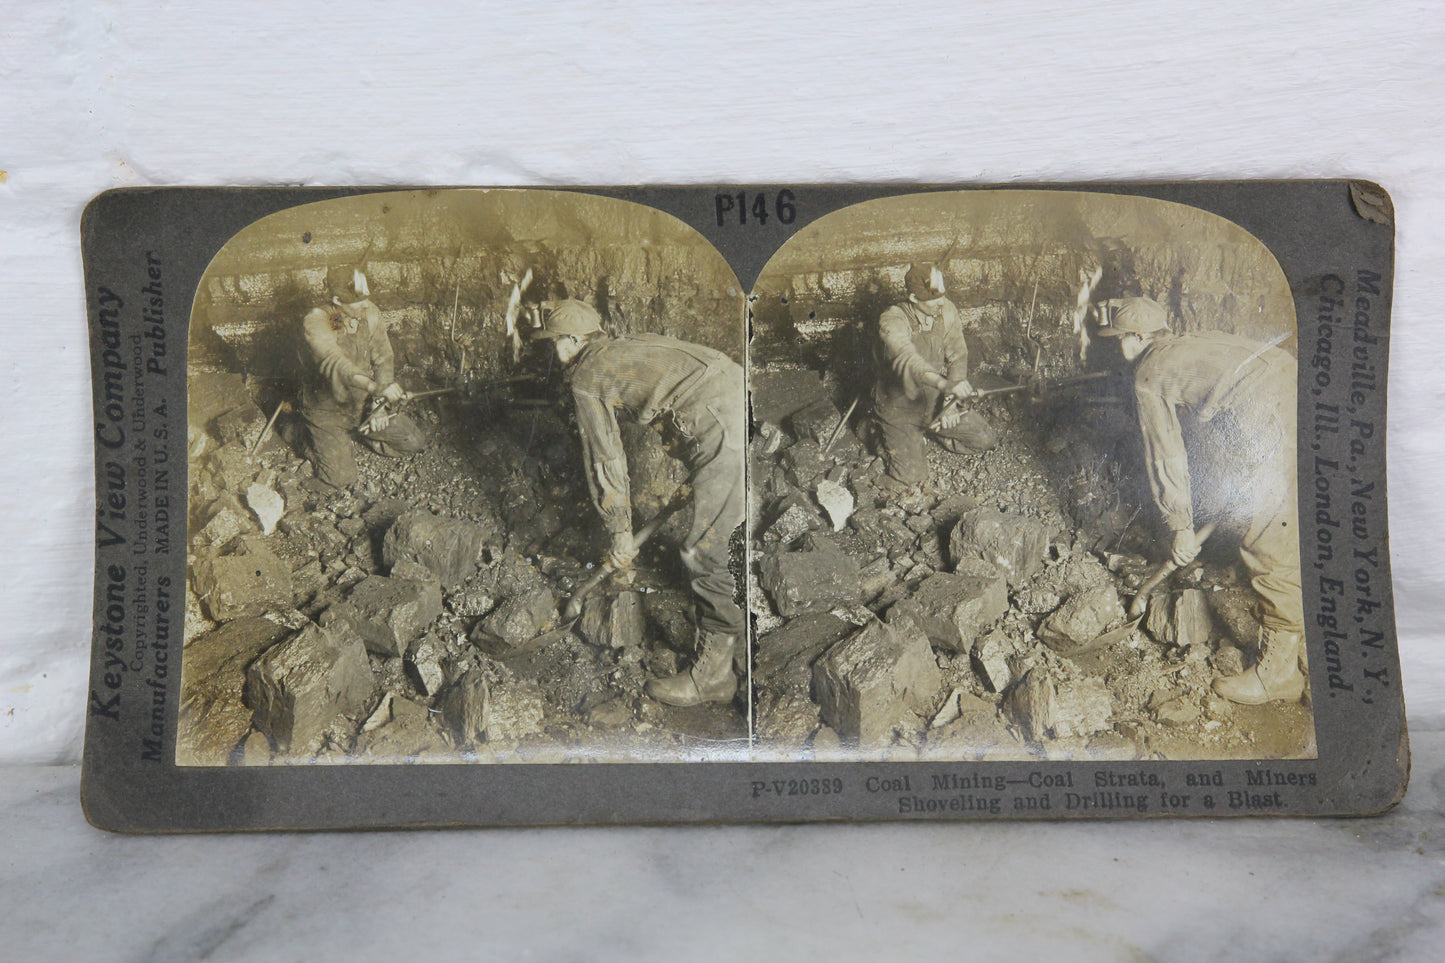 Coal Miners Shovelling and Drilling for a Blast - Keystone Stereo Card